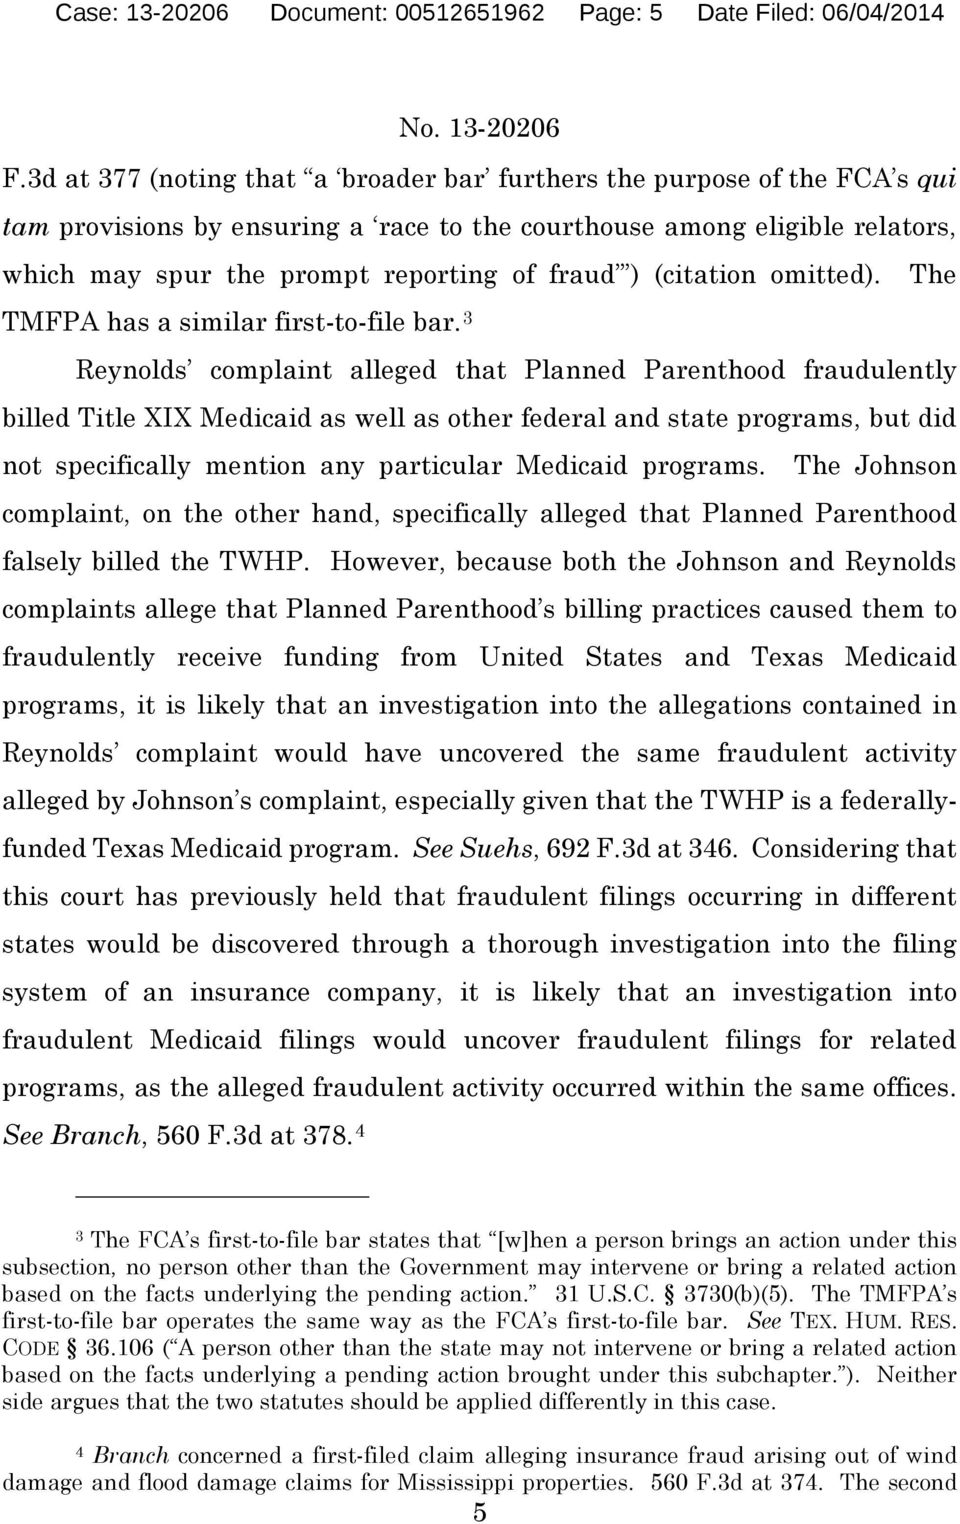 (citation omitted). The TMFPA has a similar first-to-file bar.